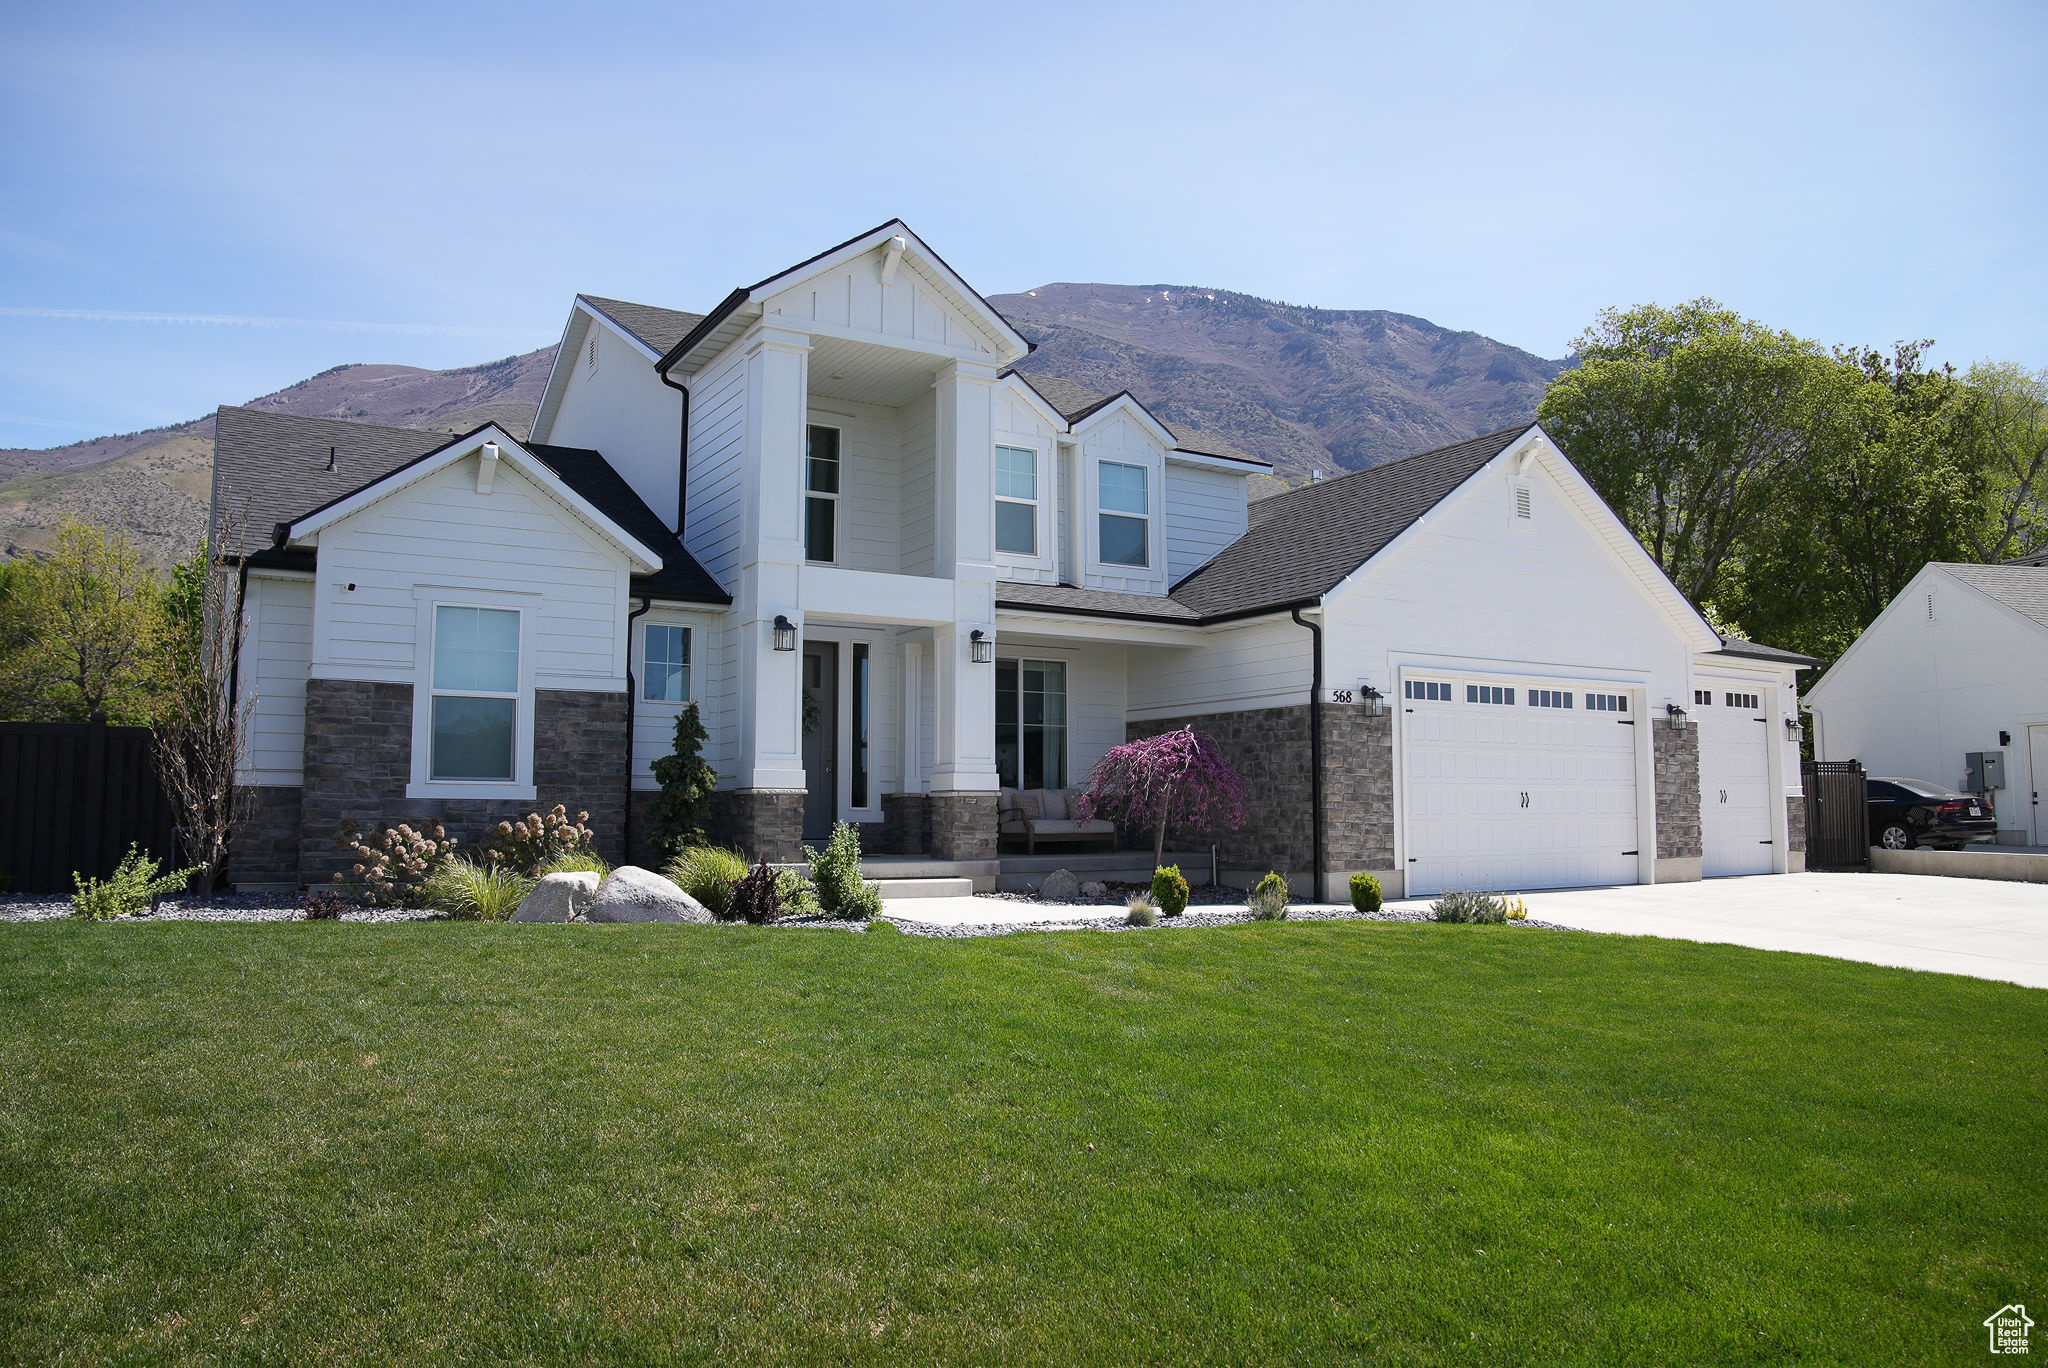 View of front of home with a garage, a front yard, and a mountain view